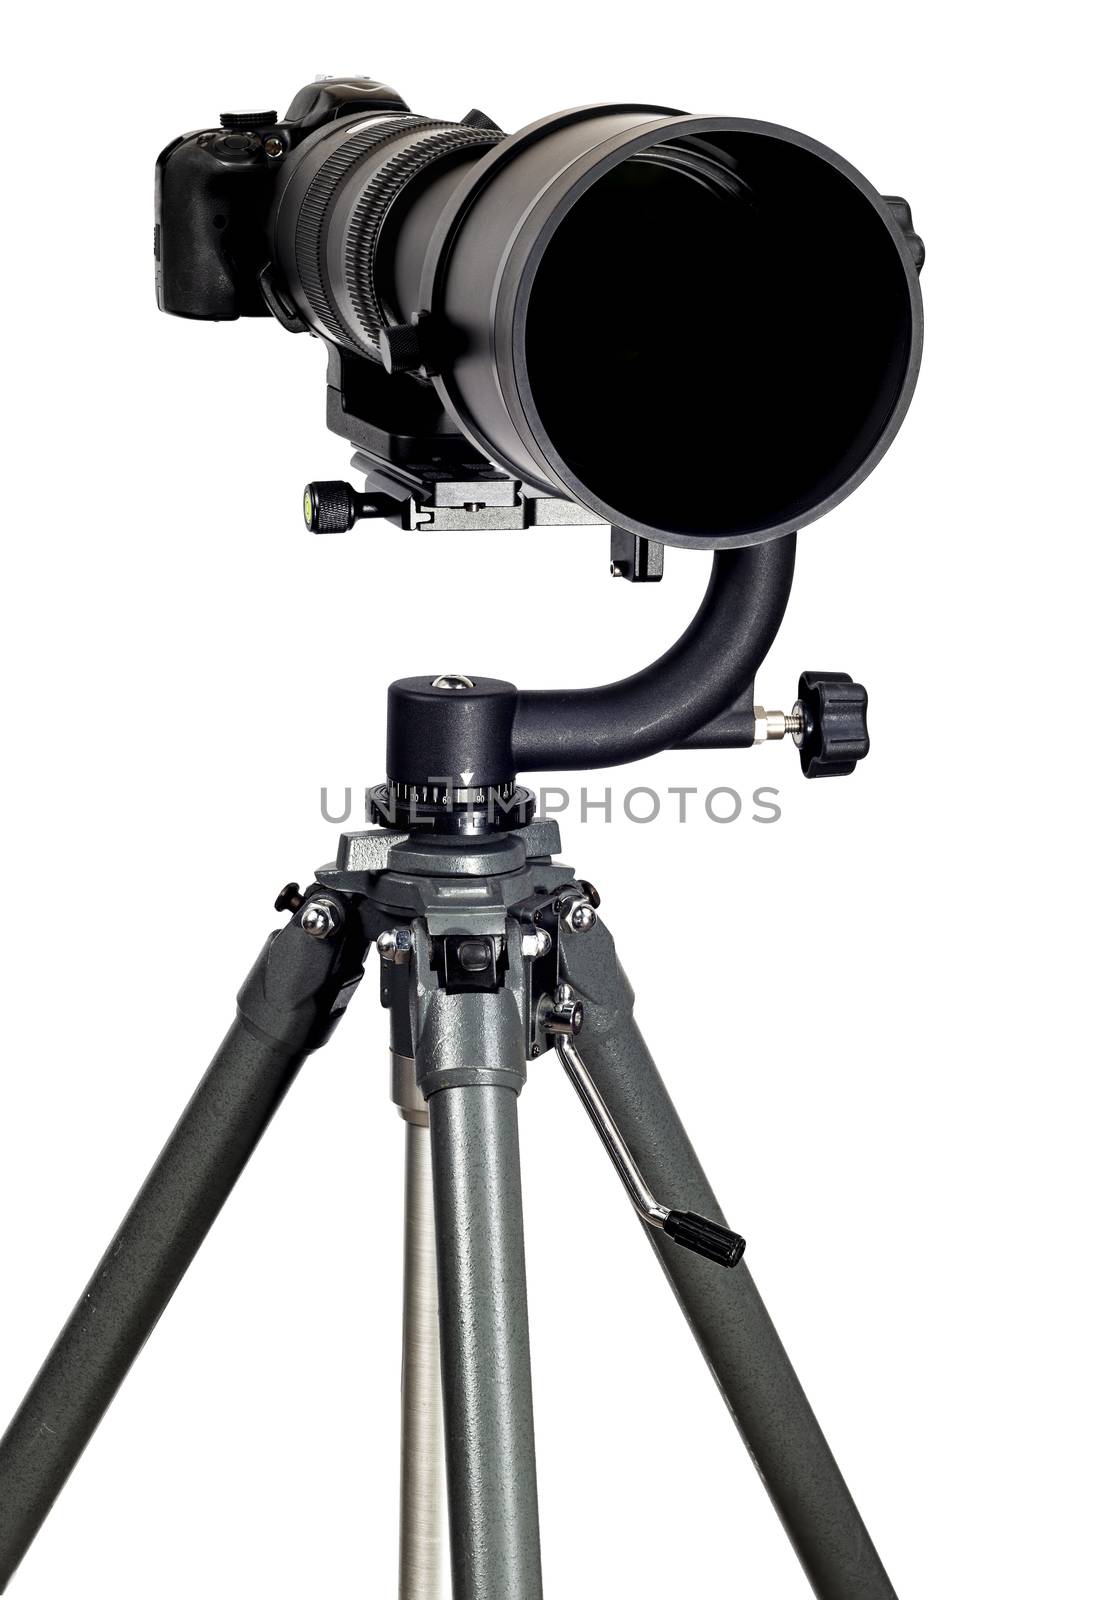 Modern Digital Camera With Super Telephoto Zoom Lens on White by stockbuster1